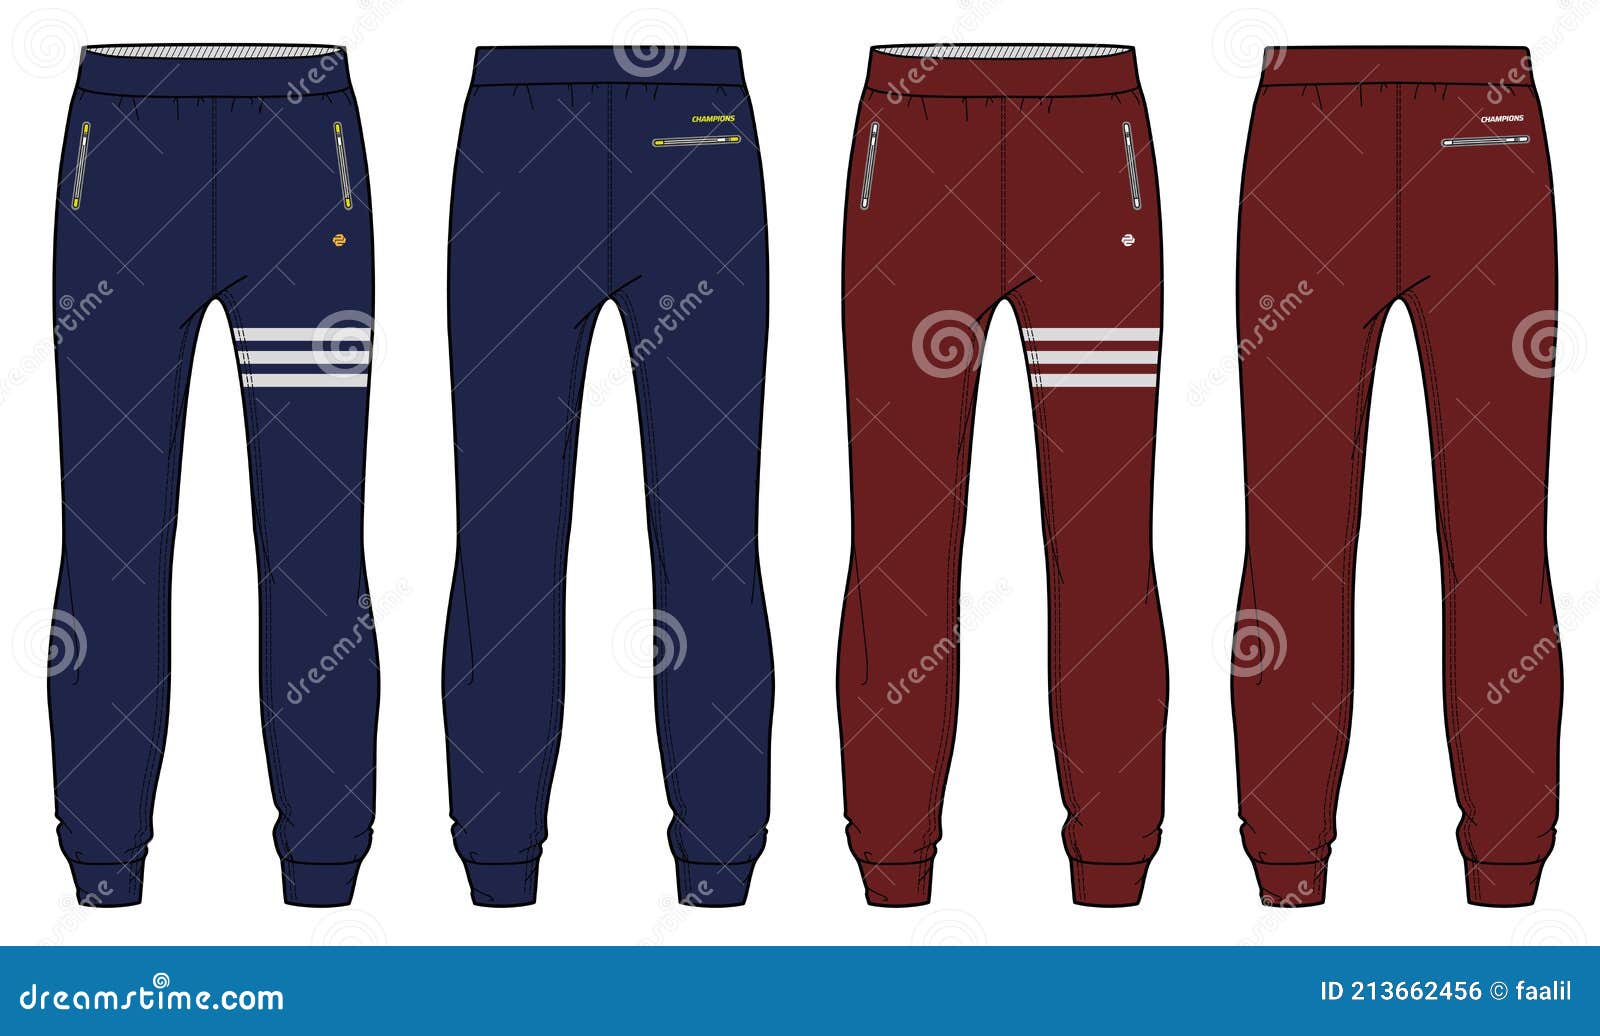 Jogger Bottom Pants Design Vector Template, Track Pants Concept with ...